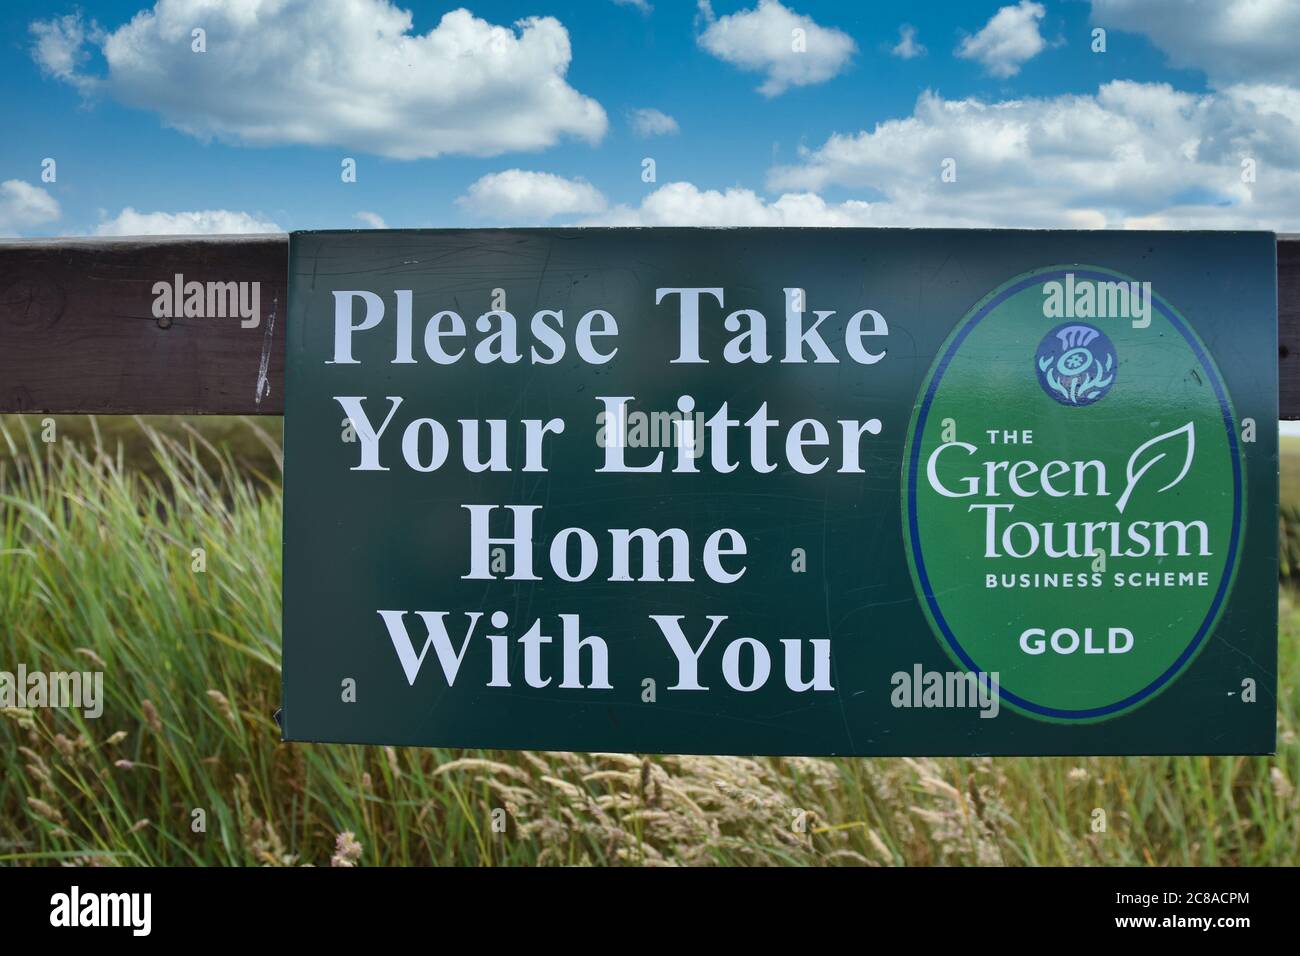 Please take your litter home with you sign in Scotland. Summertime. Wooden fence, green field, blue sky and clouds background. Stock Photo